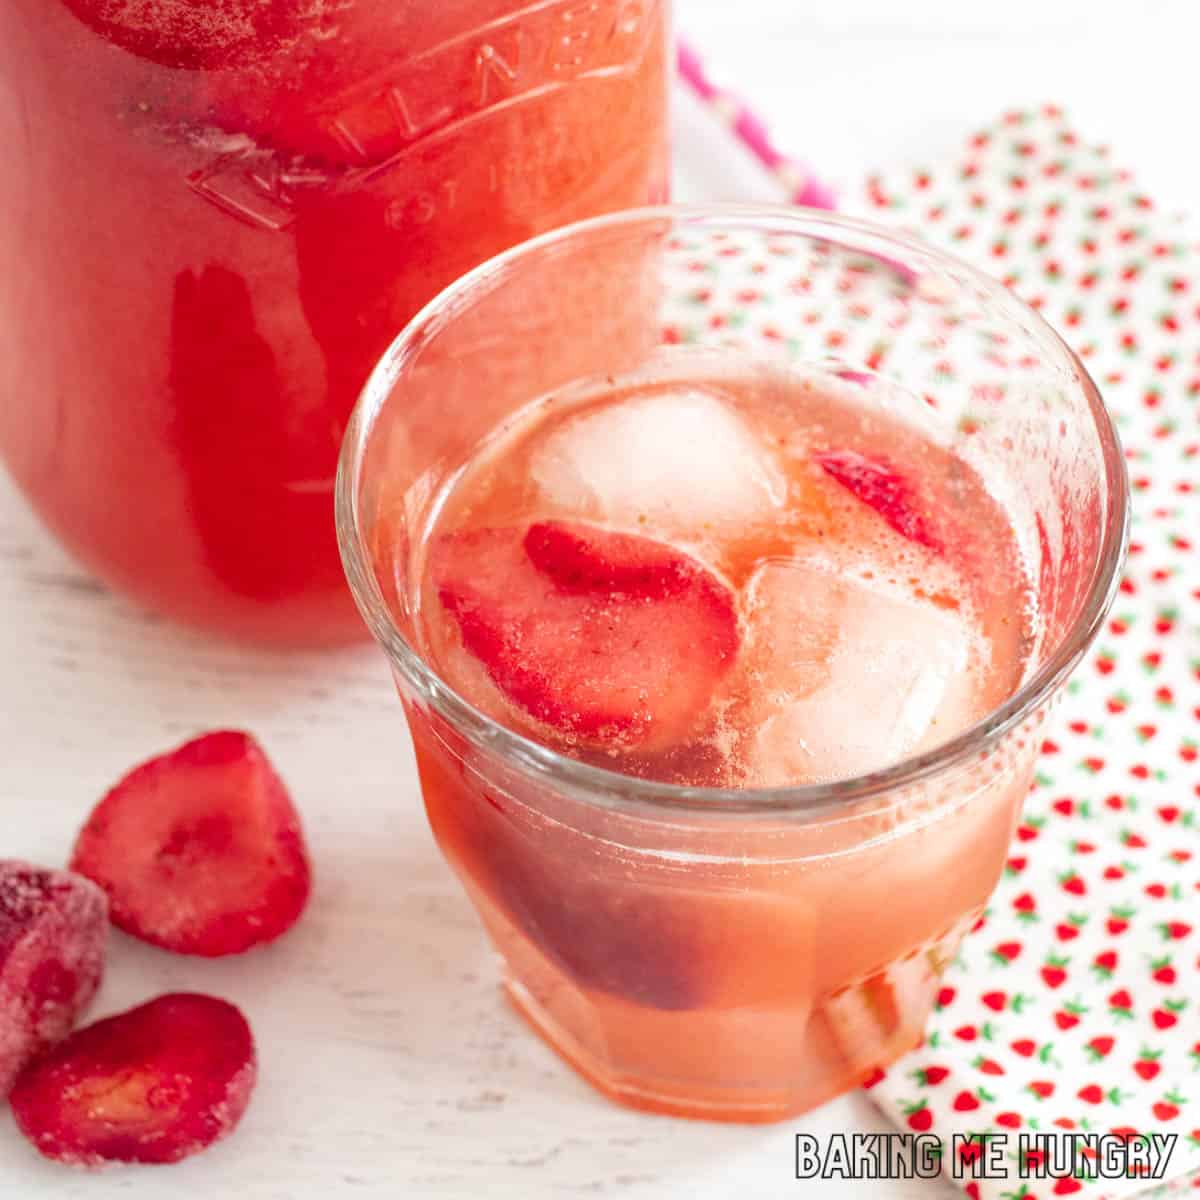 starbucks strawberry refresher recipe in a jar and glass